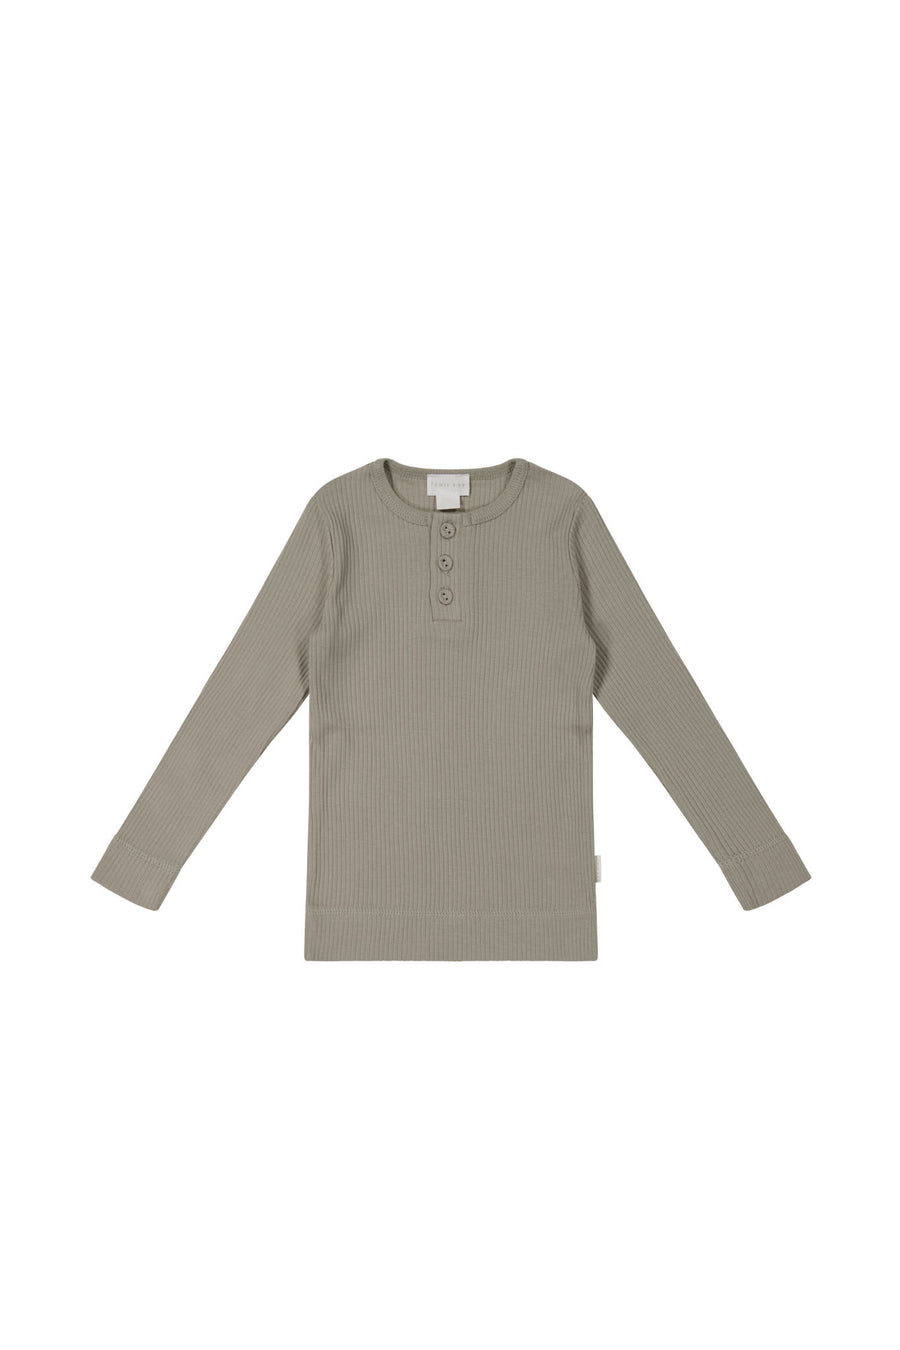 Organic Cotton Modal Long Sleeve Henley - Twig Childrens Top from Jamie Kay NZ